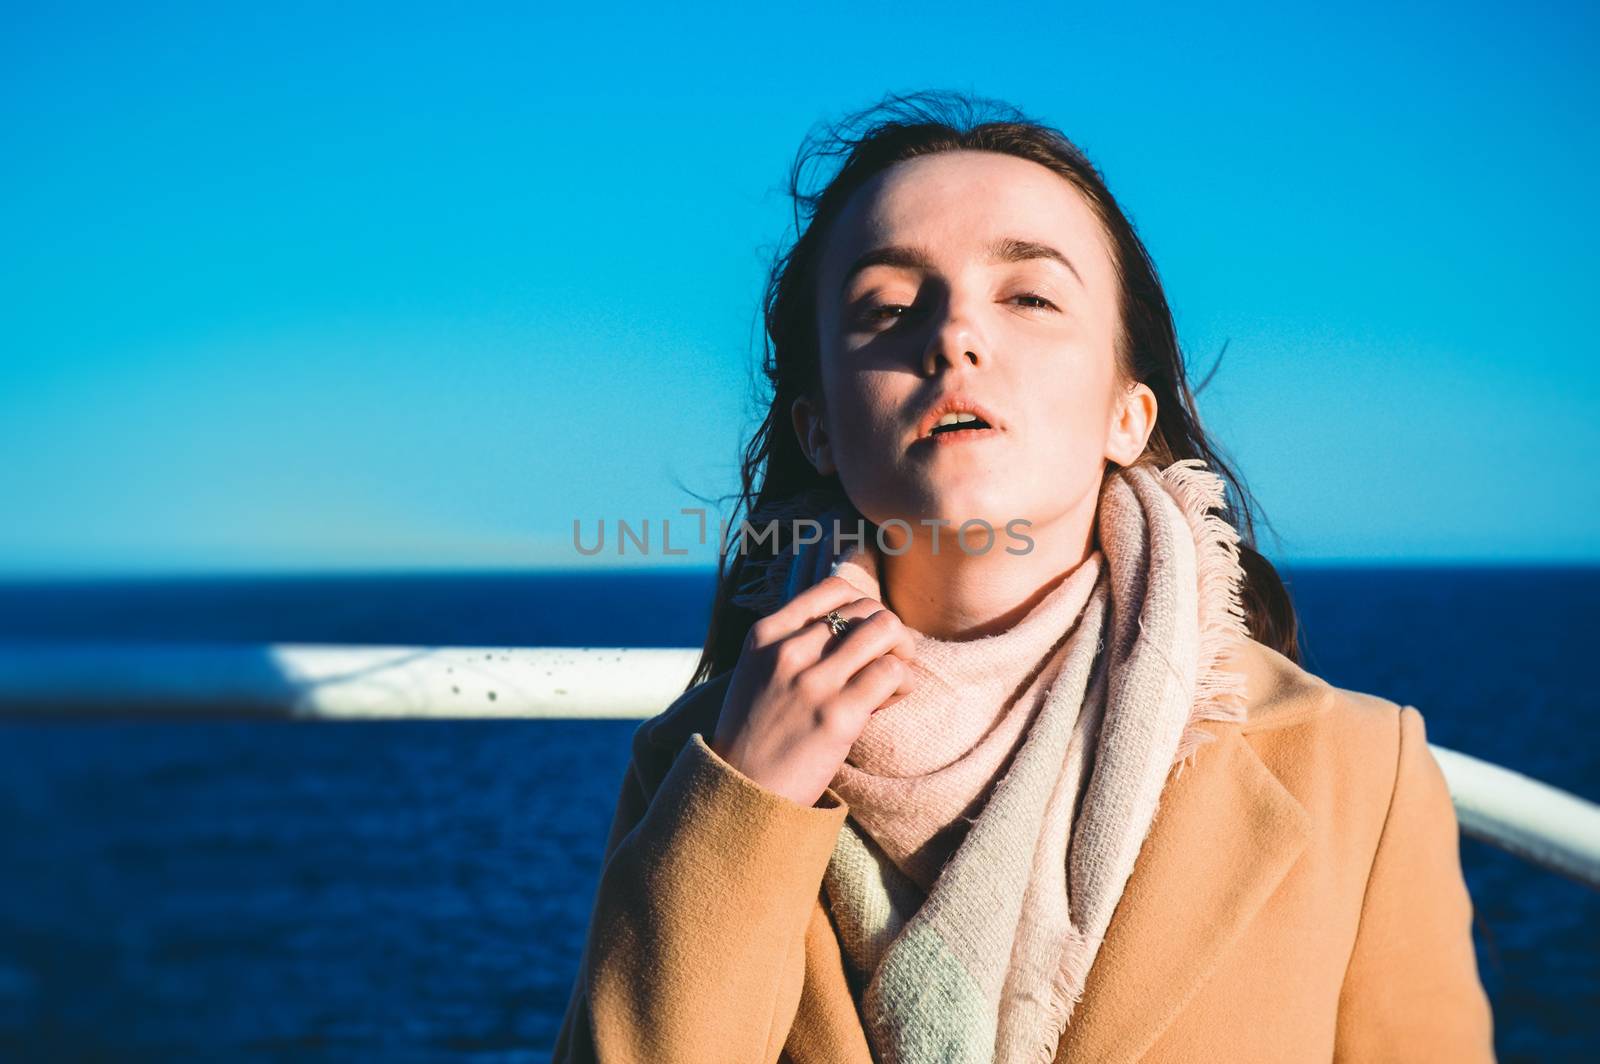 Close up portrait woman enjoying the sea from ferry. Sea life, spring vacations, casual wear, wind, pretty face, fashion portrait, model